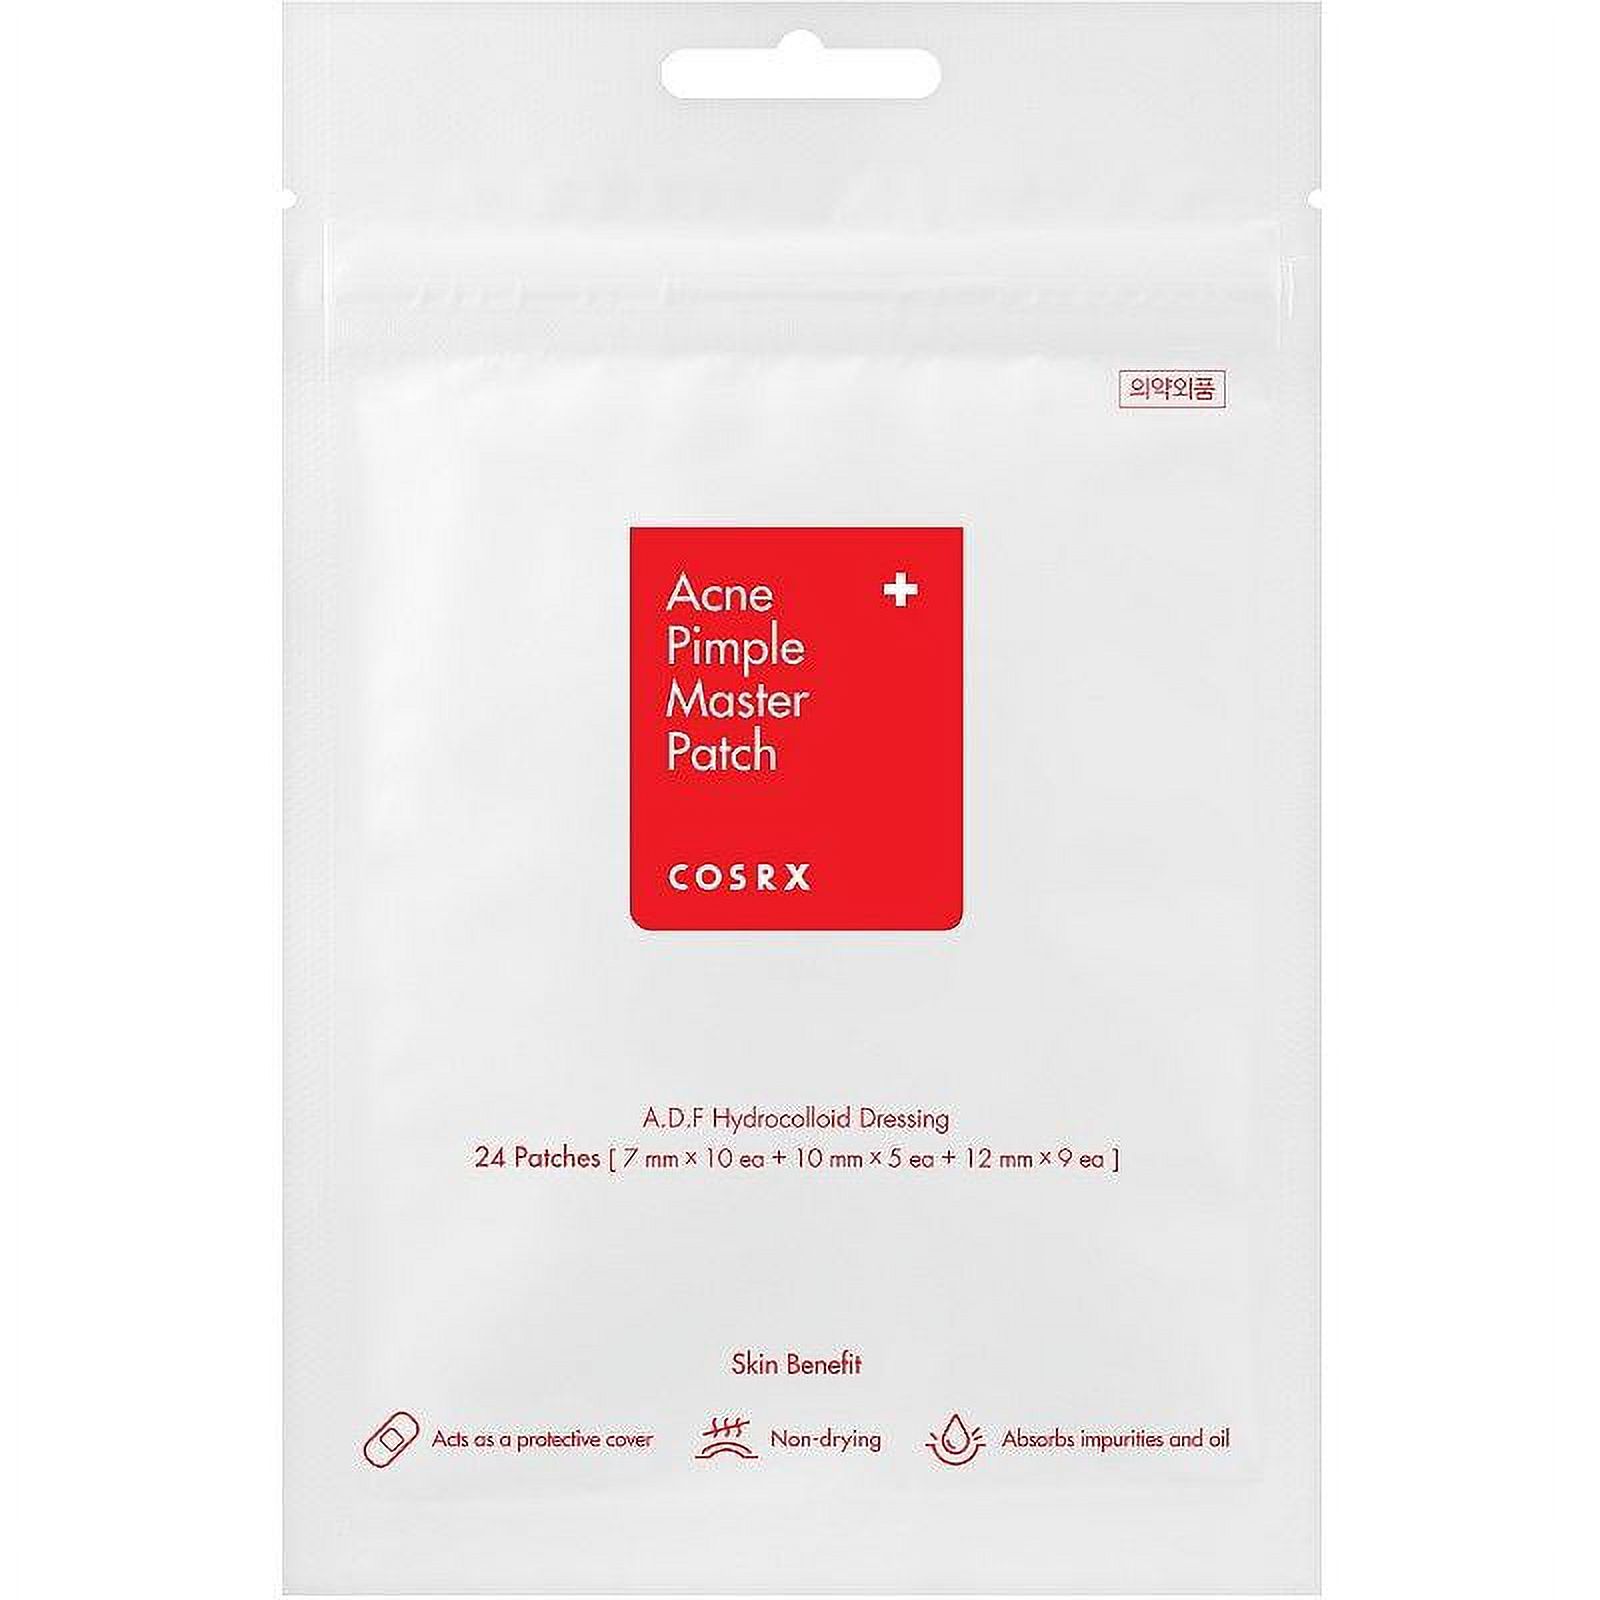 COSRX Acne Pimple Master Patch, 24 Ct - image 1 of 4